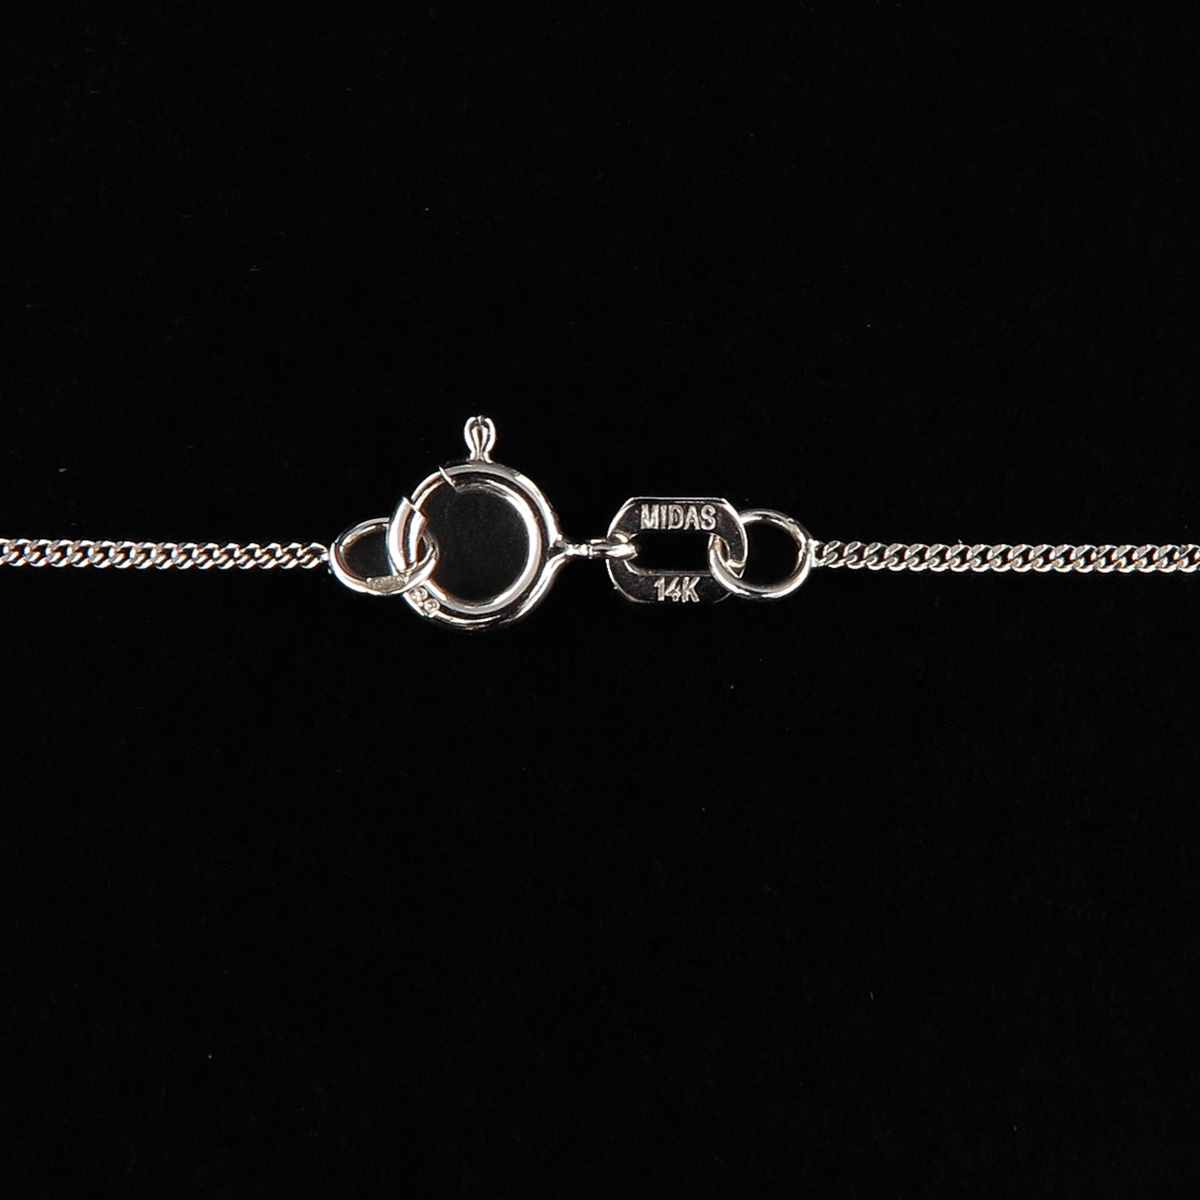 A Necklace with Pearl and Diamond Pendant - Image 4 of 6